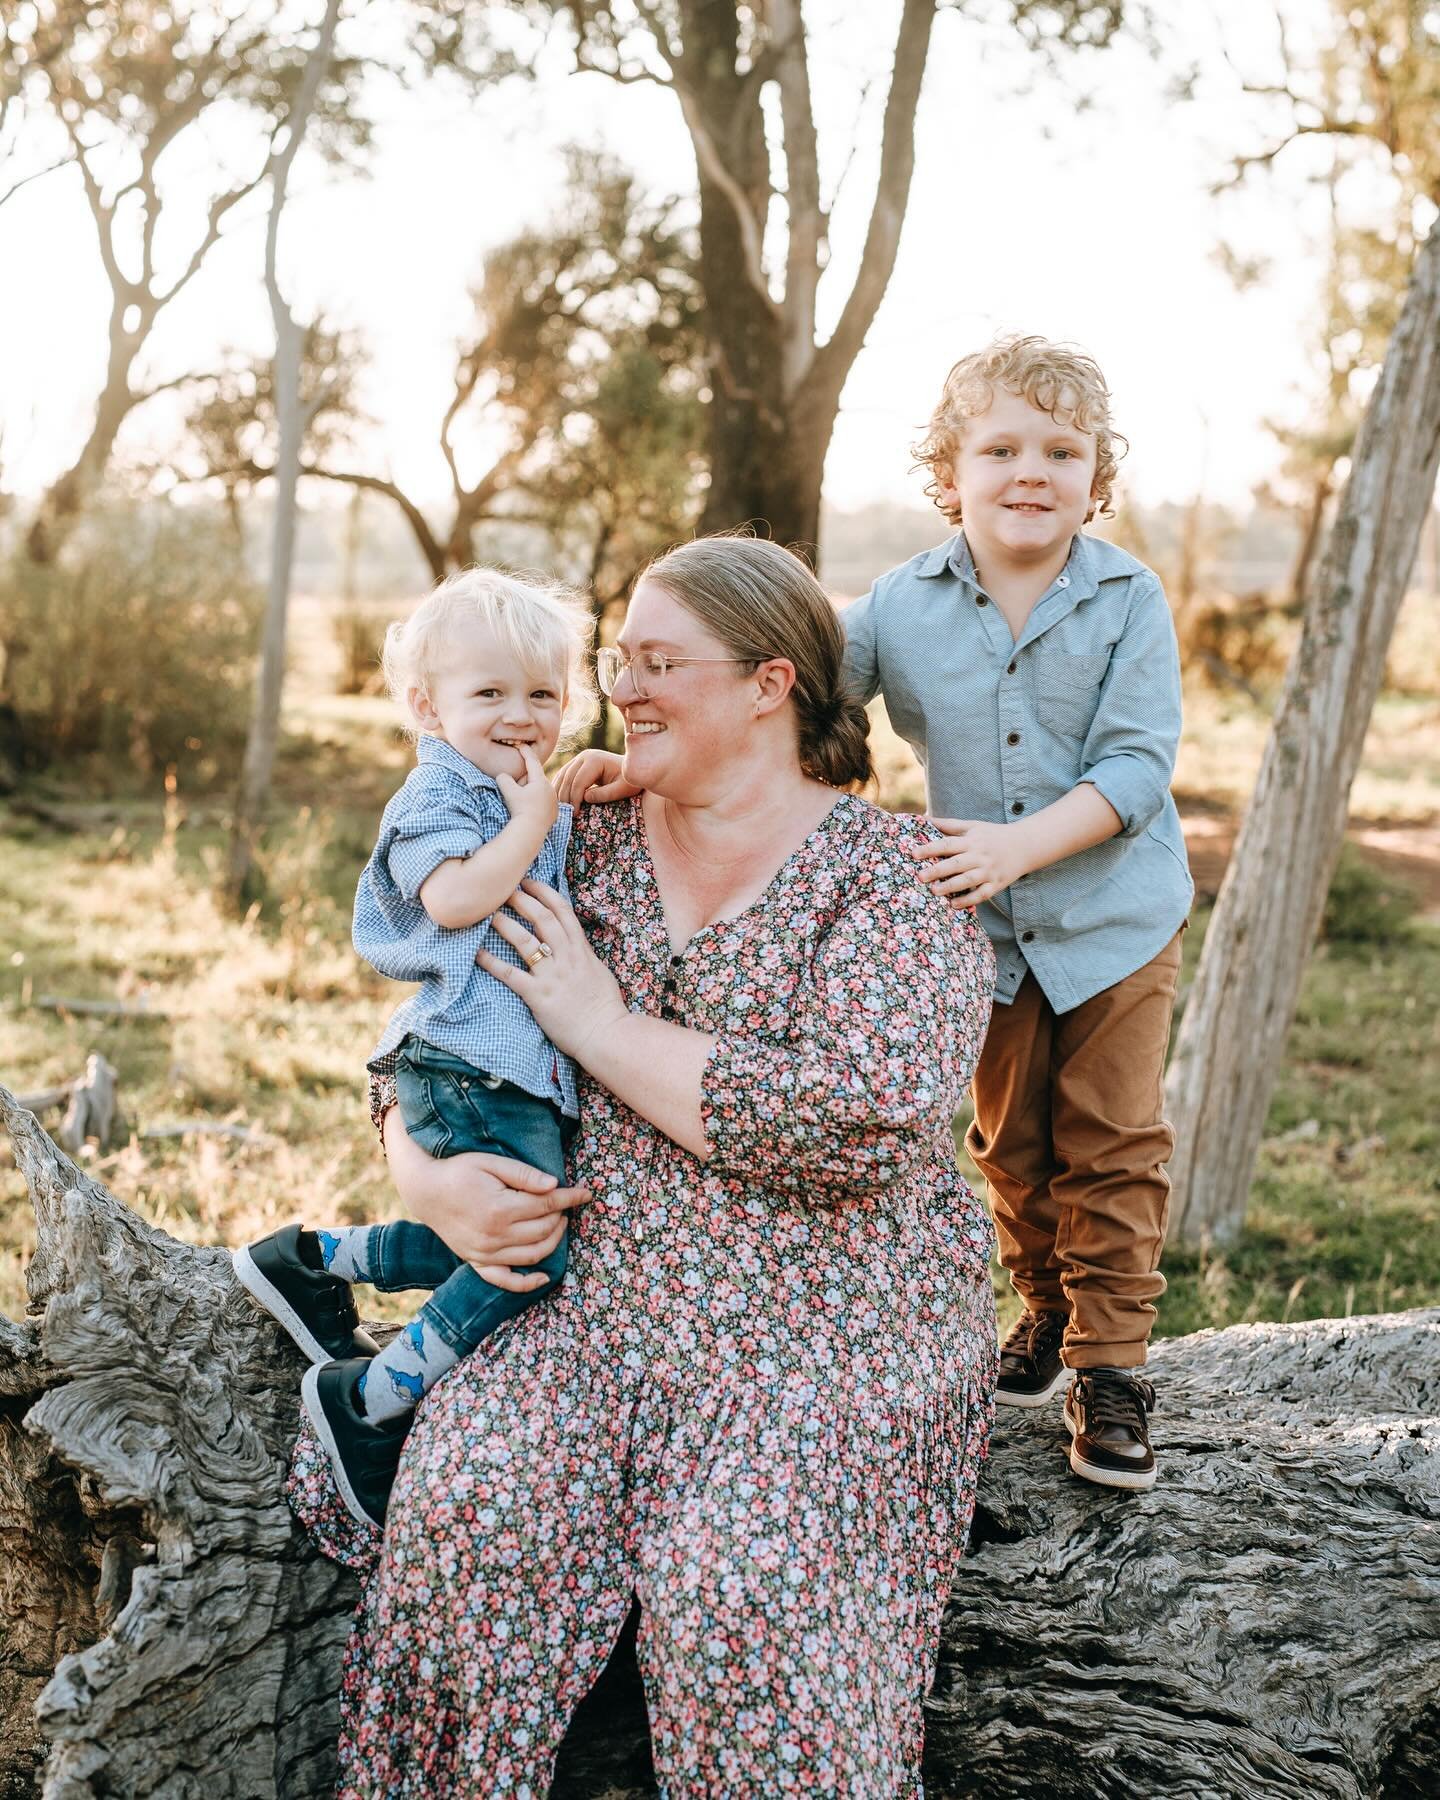 I&rsquo;ve partnered with Boggabri Nurruby to raise money for their centre. I&rsquo;m offering mini family shoots this Saturday in Boggabri, a couple of spots are still available 💓 Book through the link:

https://www.pennyvella.com/digital-products-